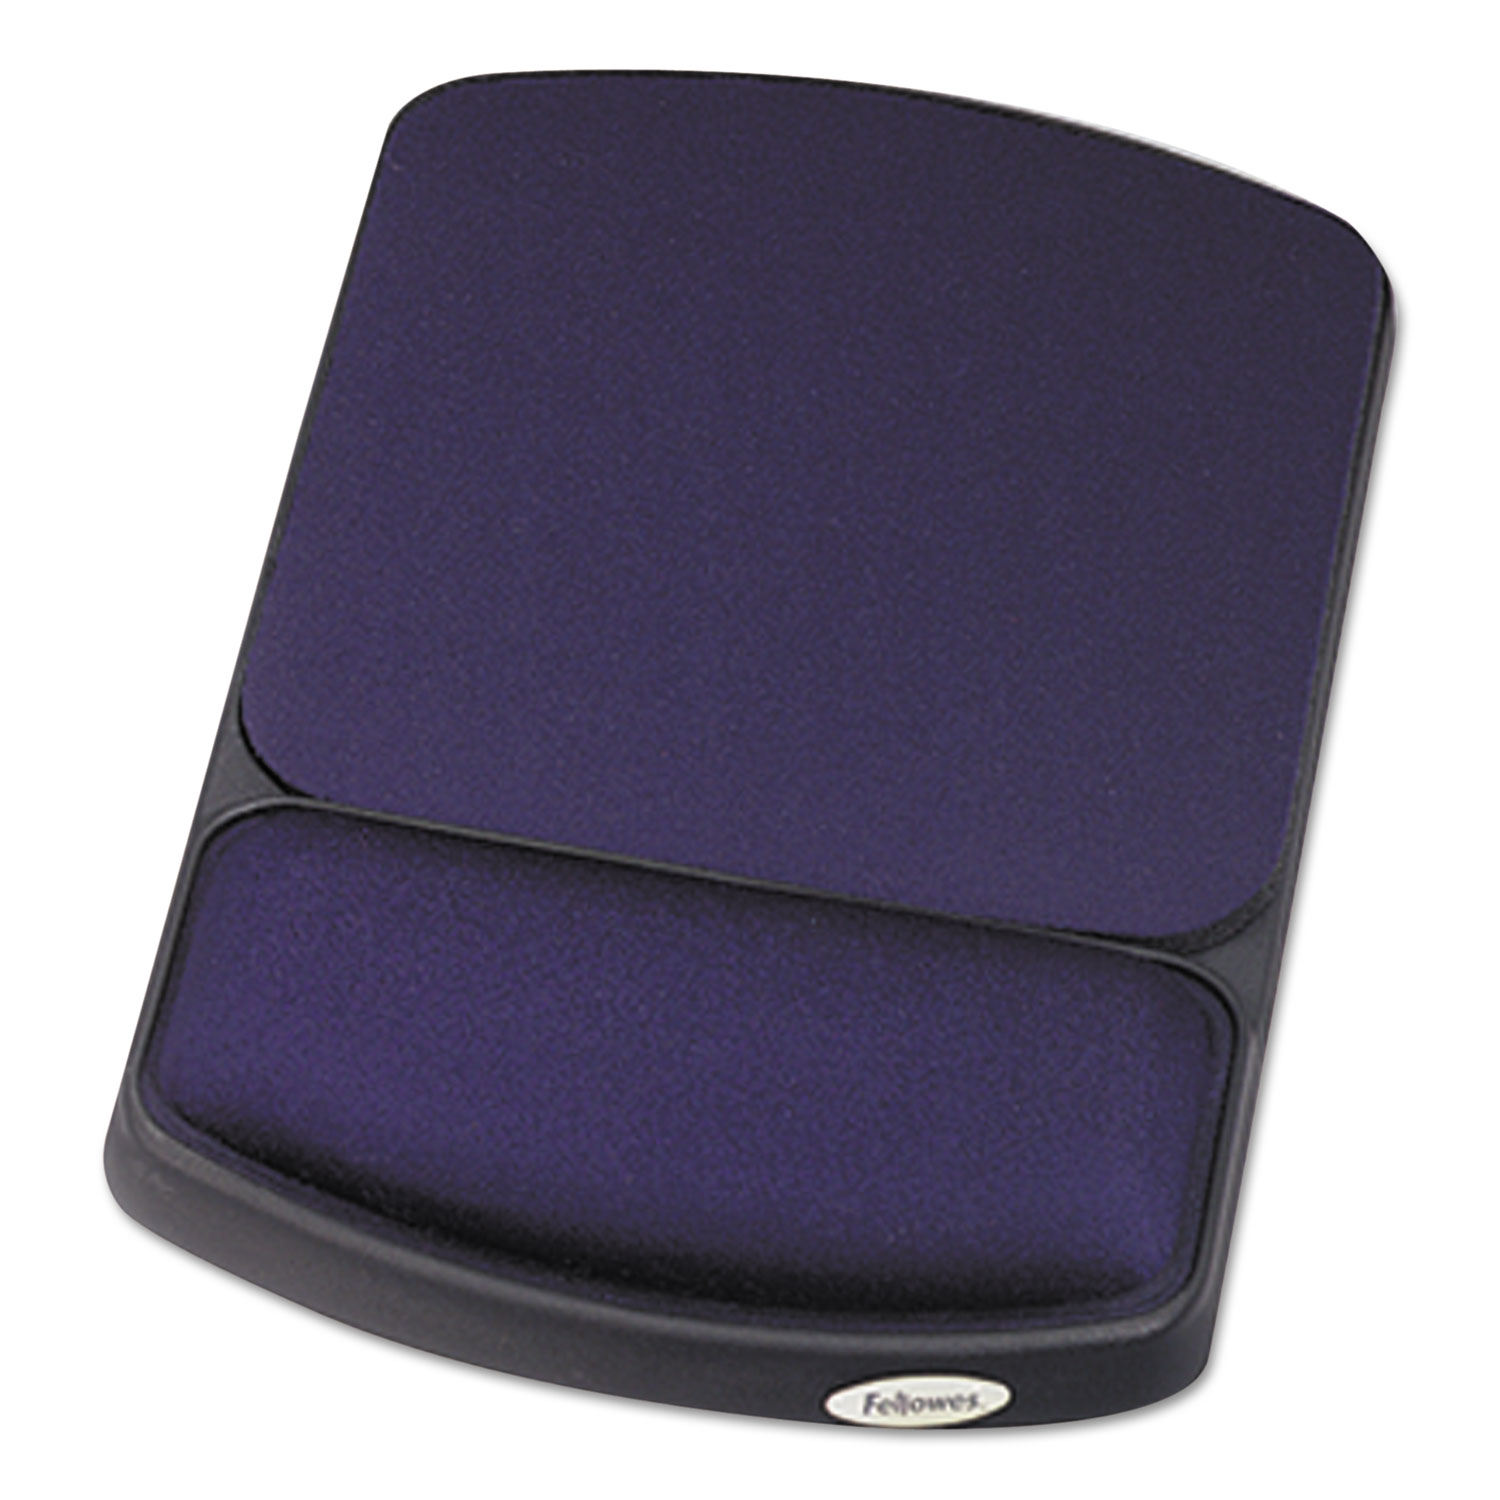  Fellowes 98741 Gel Mouse Pad with Wrist Rest, 6.25 x 10.12, Black/Sapphire (FEL98741) 